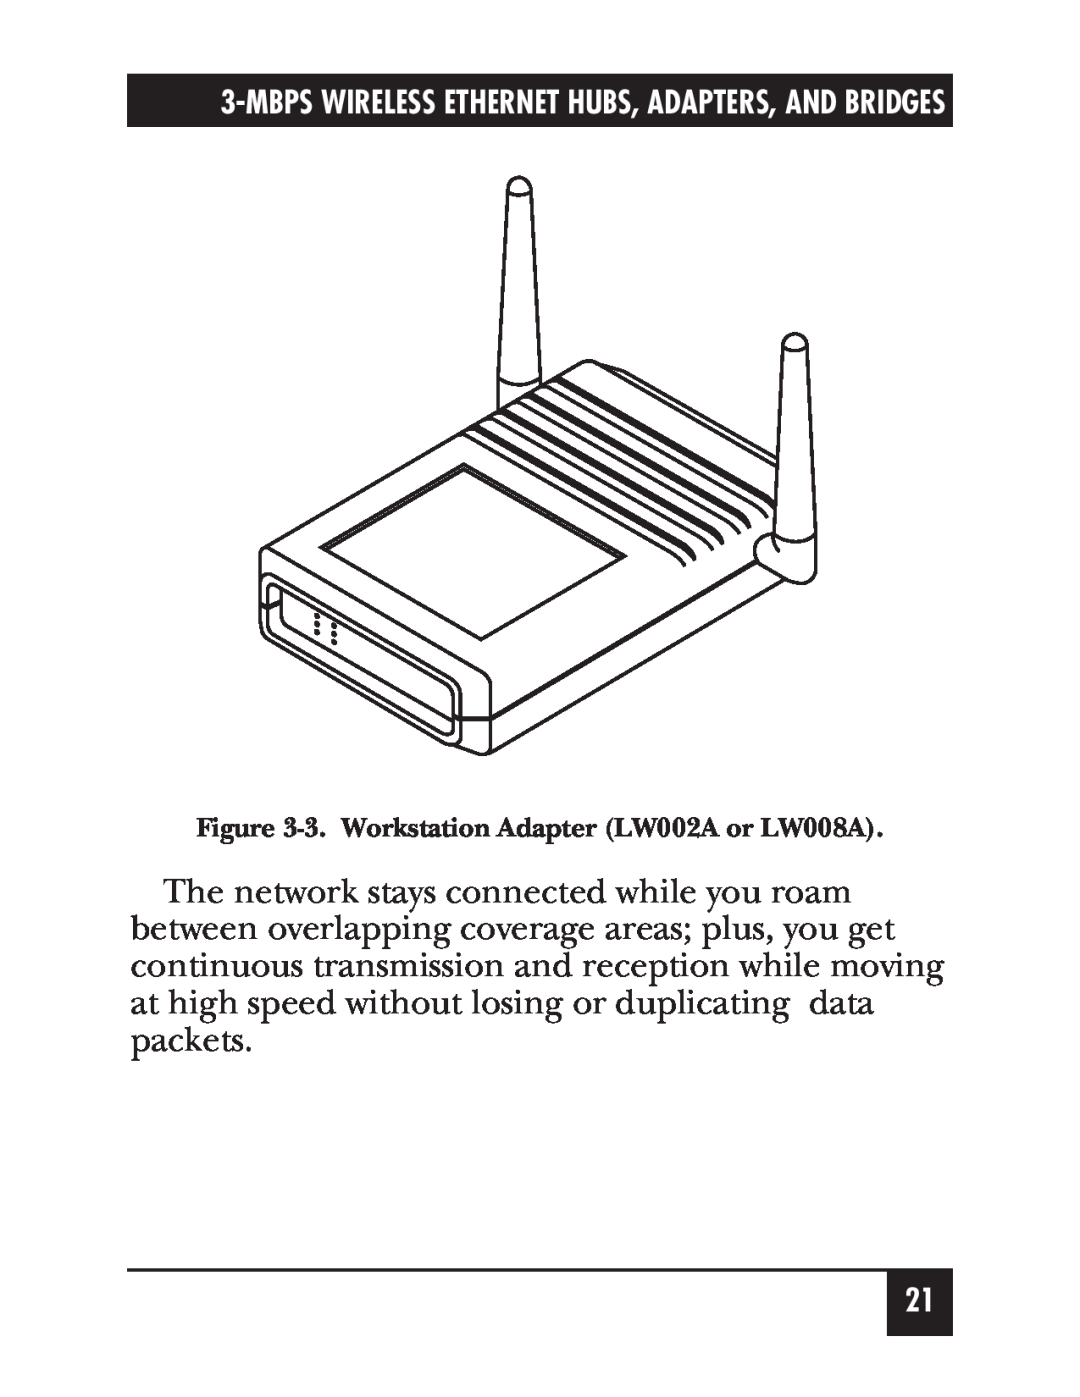 Black Box LW007A, LW012A manual Mbps Wireless Ethernet Hubs, Adapters, And Bridges, 3. Workstation Adapter LW002A or LW008A 